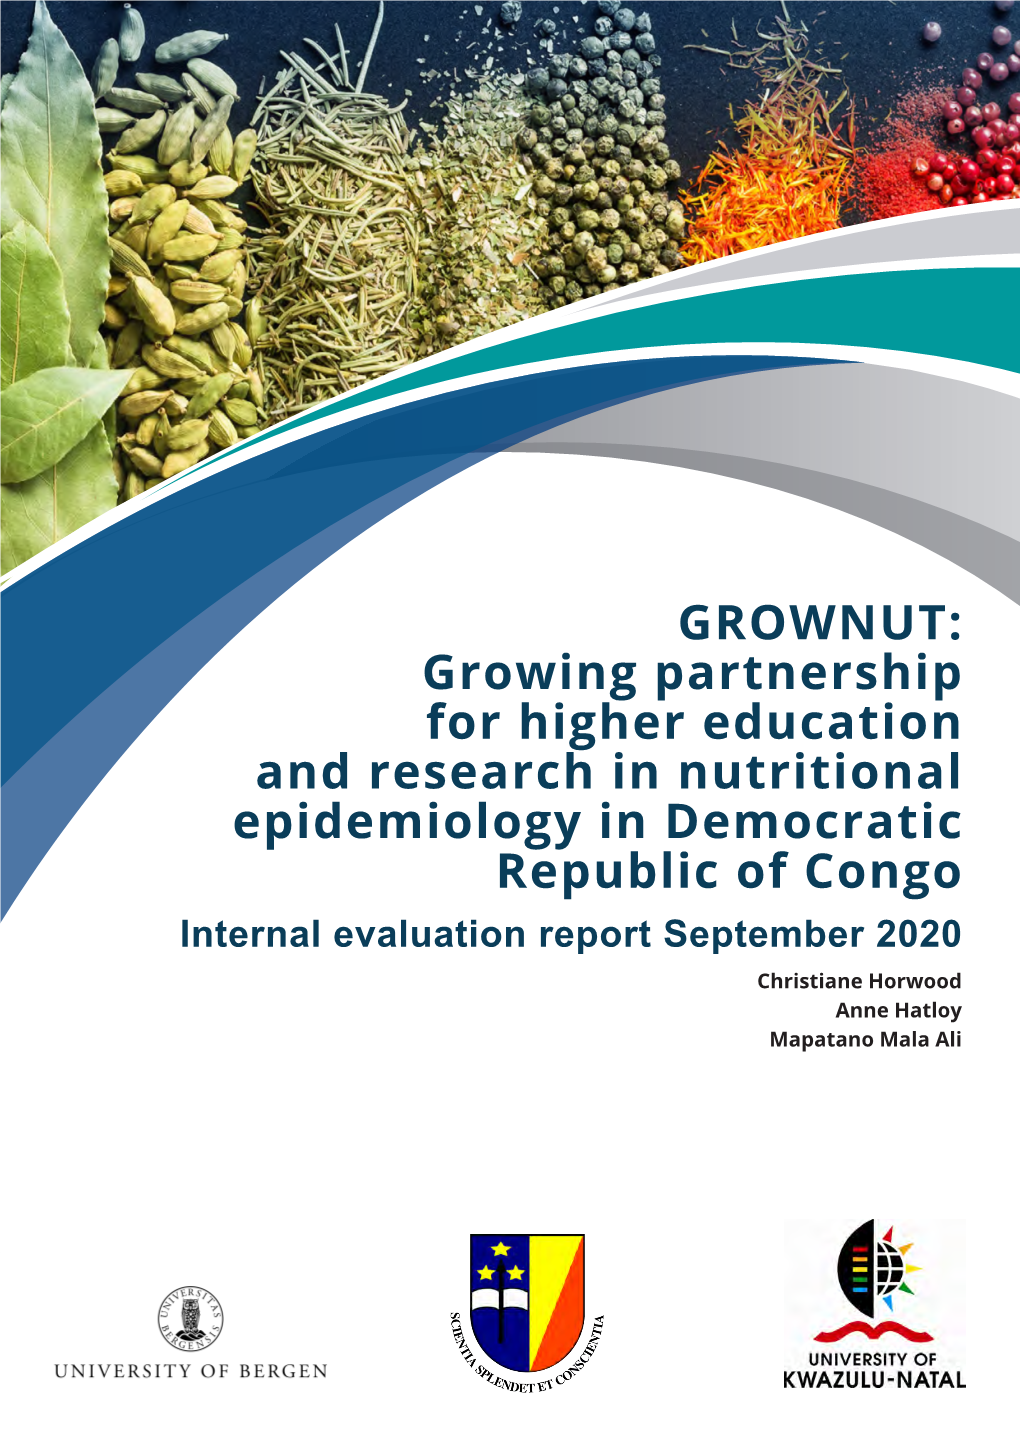 GROWNUT: Growing Partnership for Higher Education and Research In